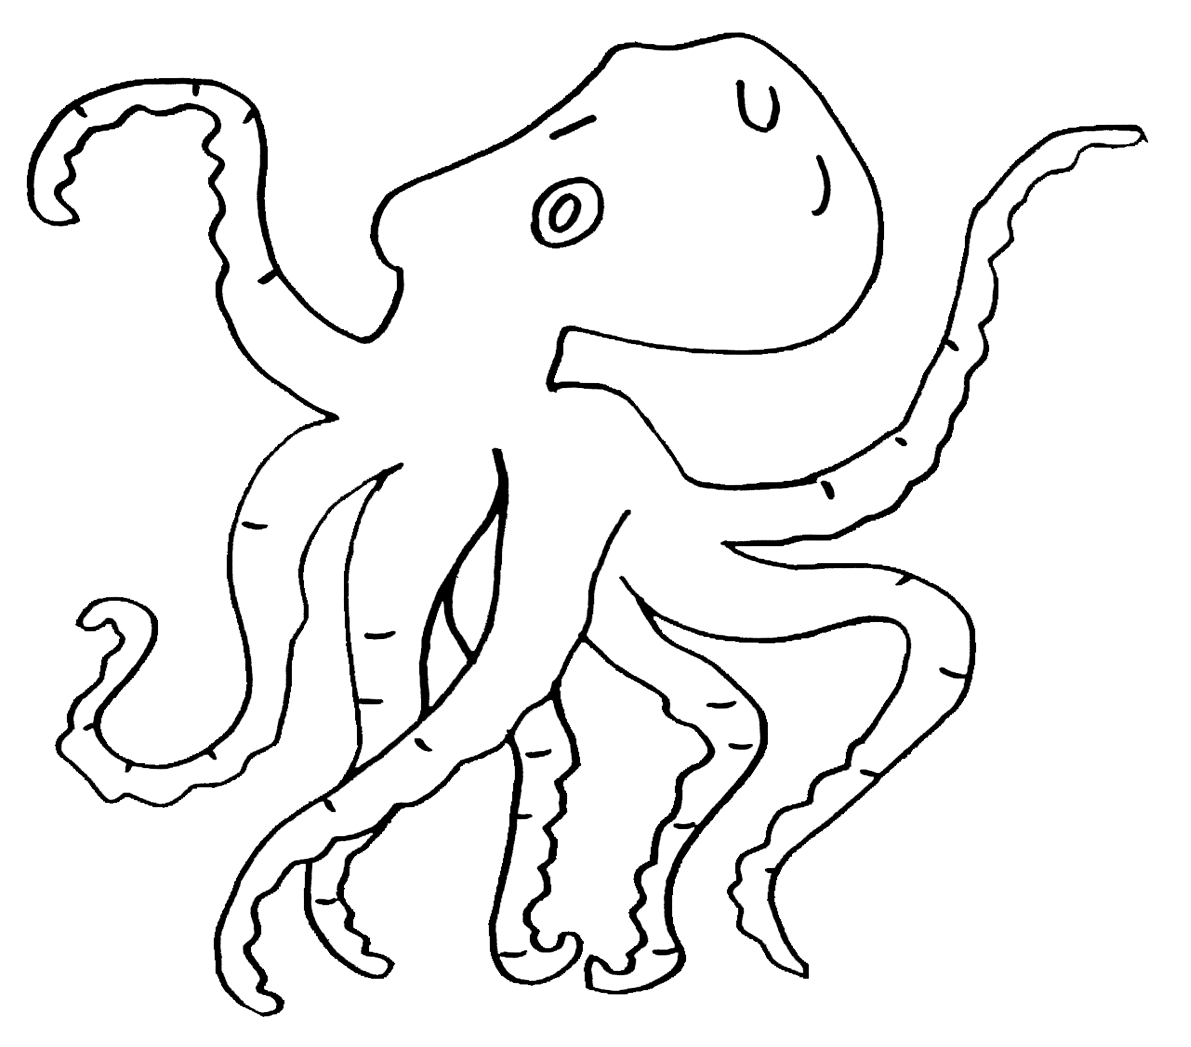 Printable Octopus Coloring Pages | ColoringMe.com